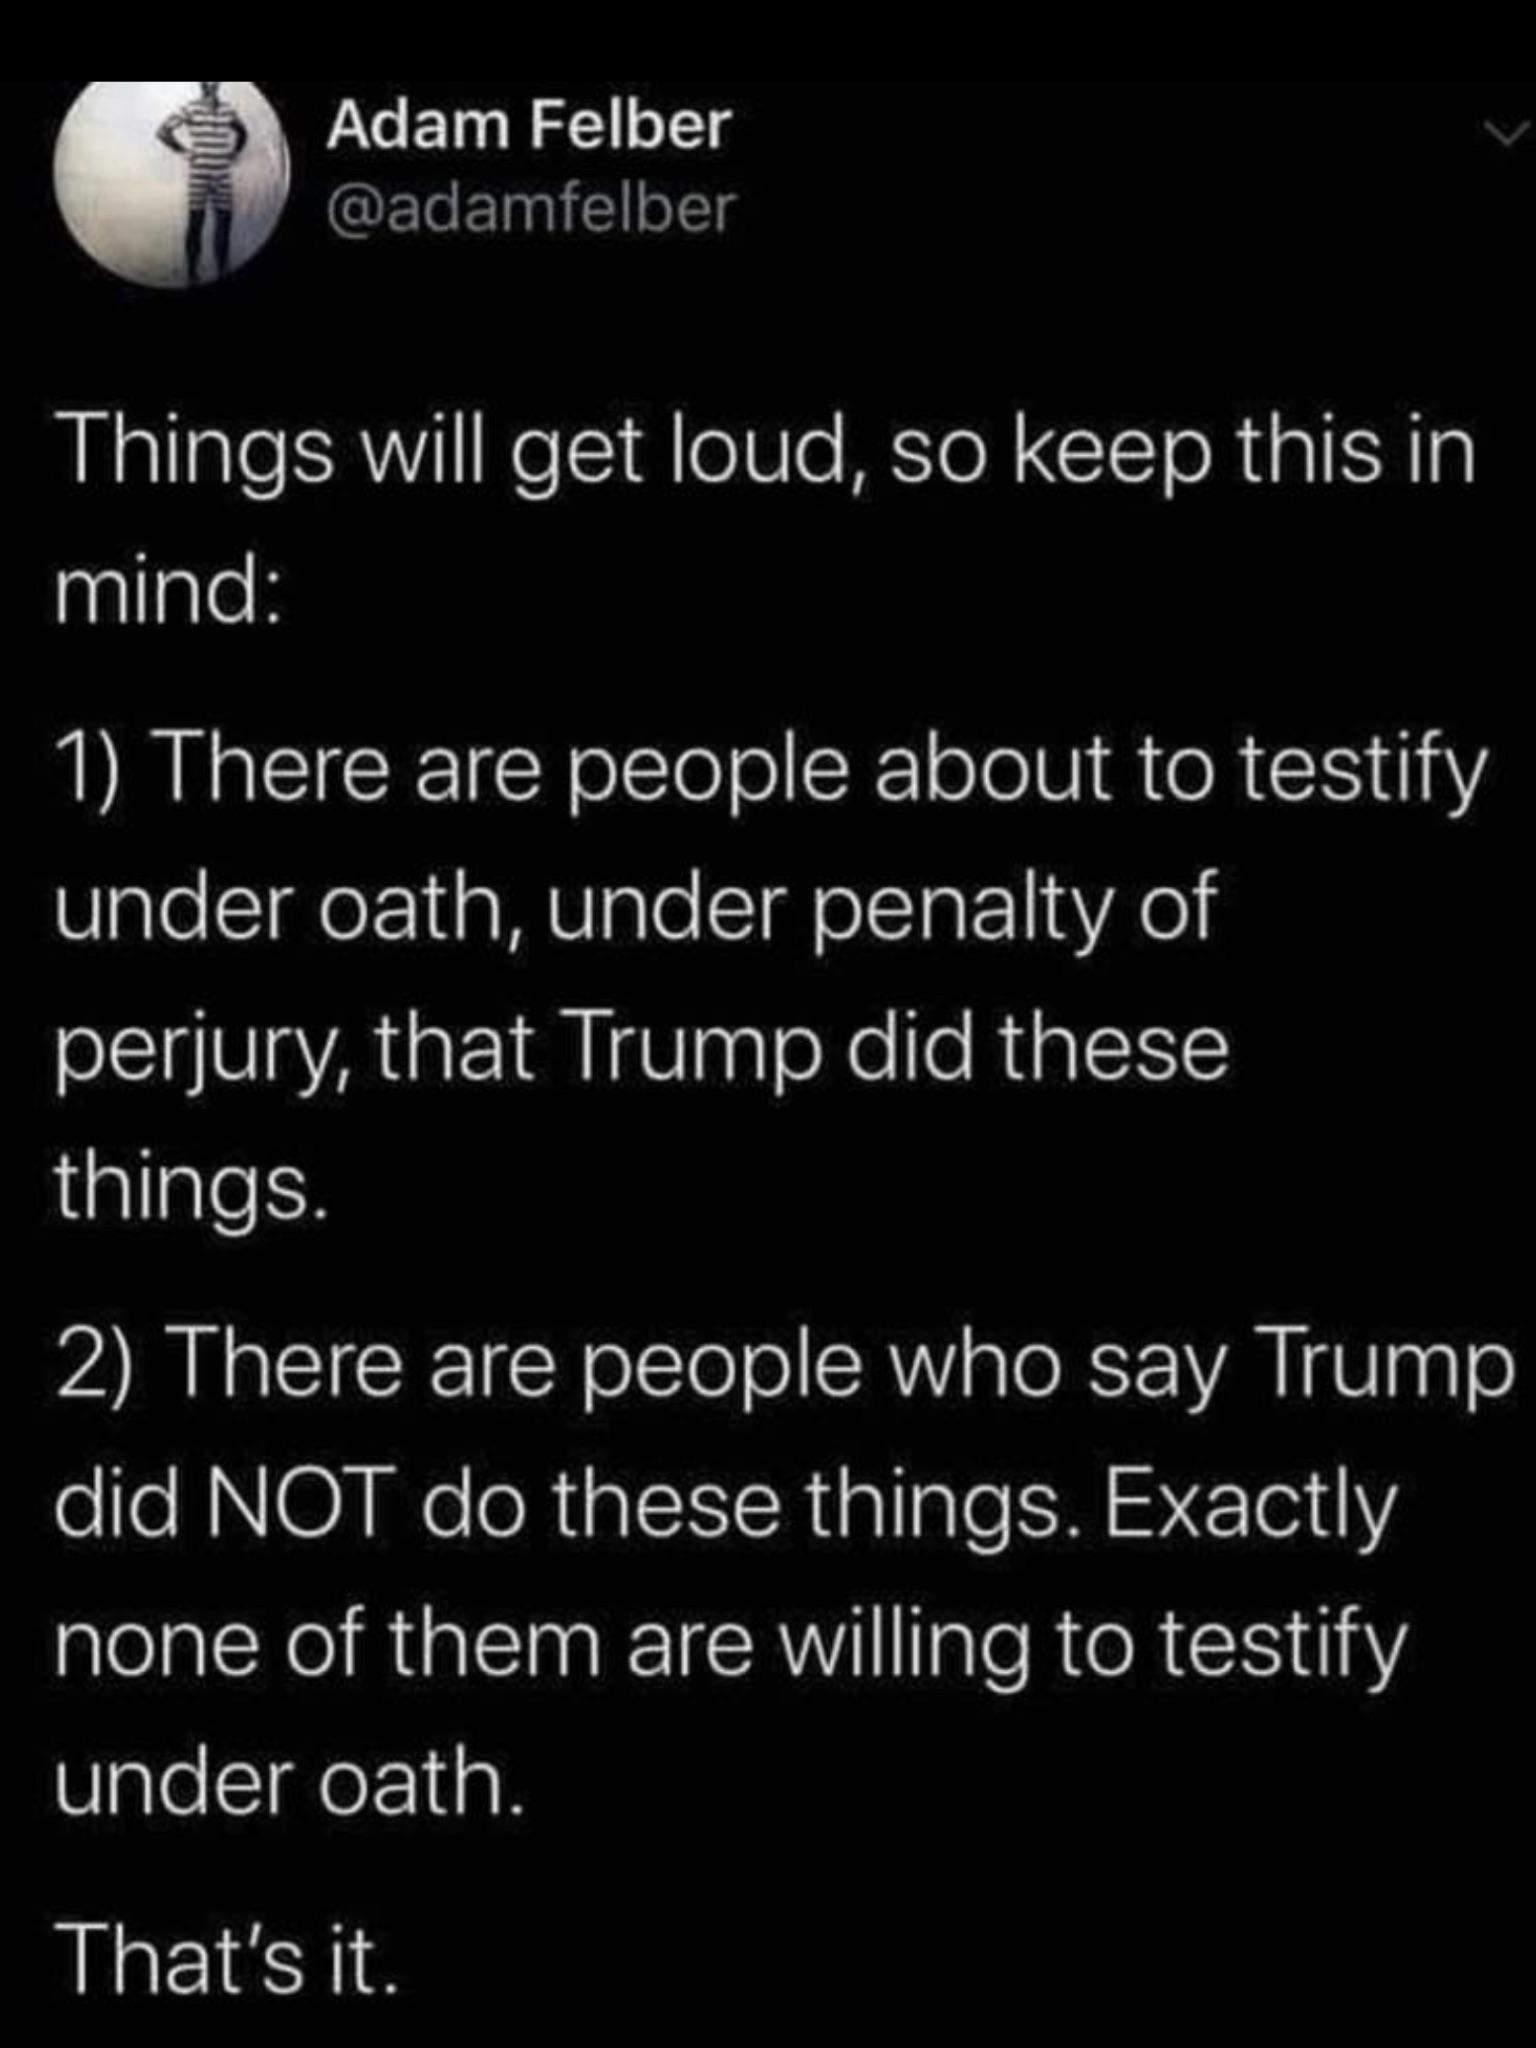 political political-memes political text: Adam Felber @adamfelber Things will get loud, so keep this in mind: 1) There are people about to testify under oath, under penalty of perjury, that Trump did these things. 2) There are people who say Trump did NOT do these things. Exactly none of them are willing to testify under oath. That's it. 